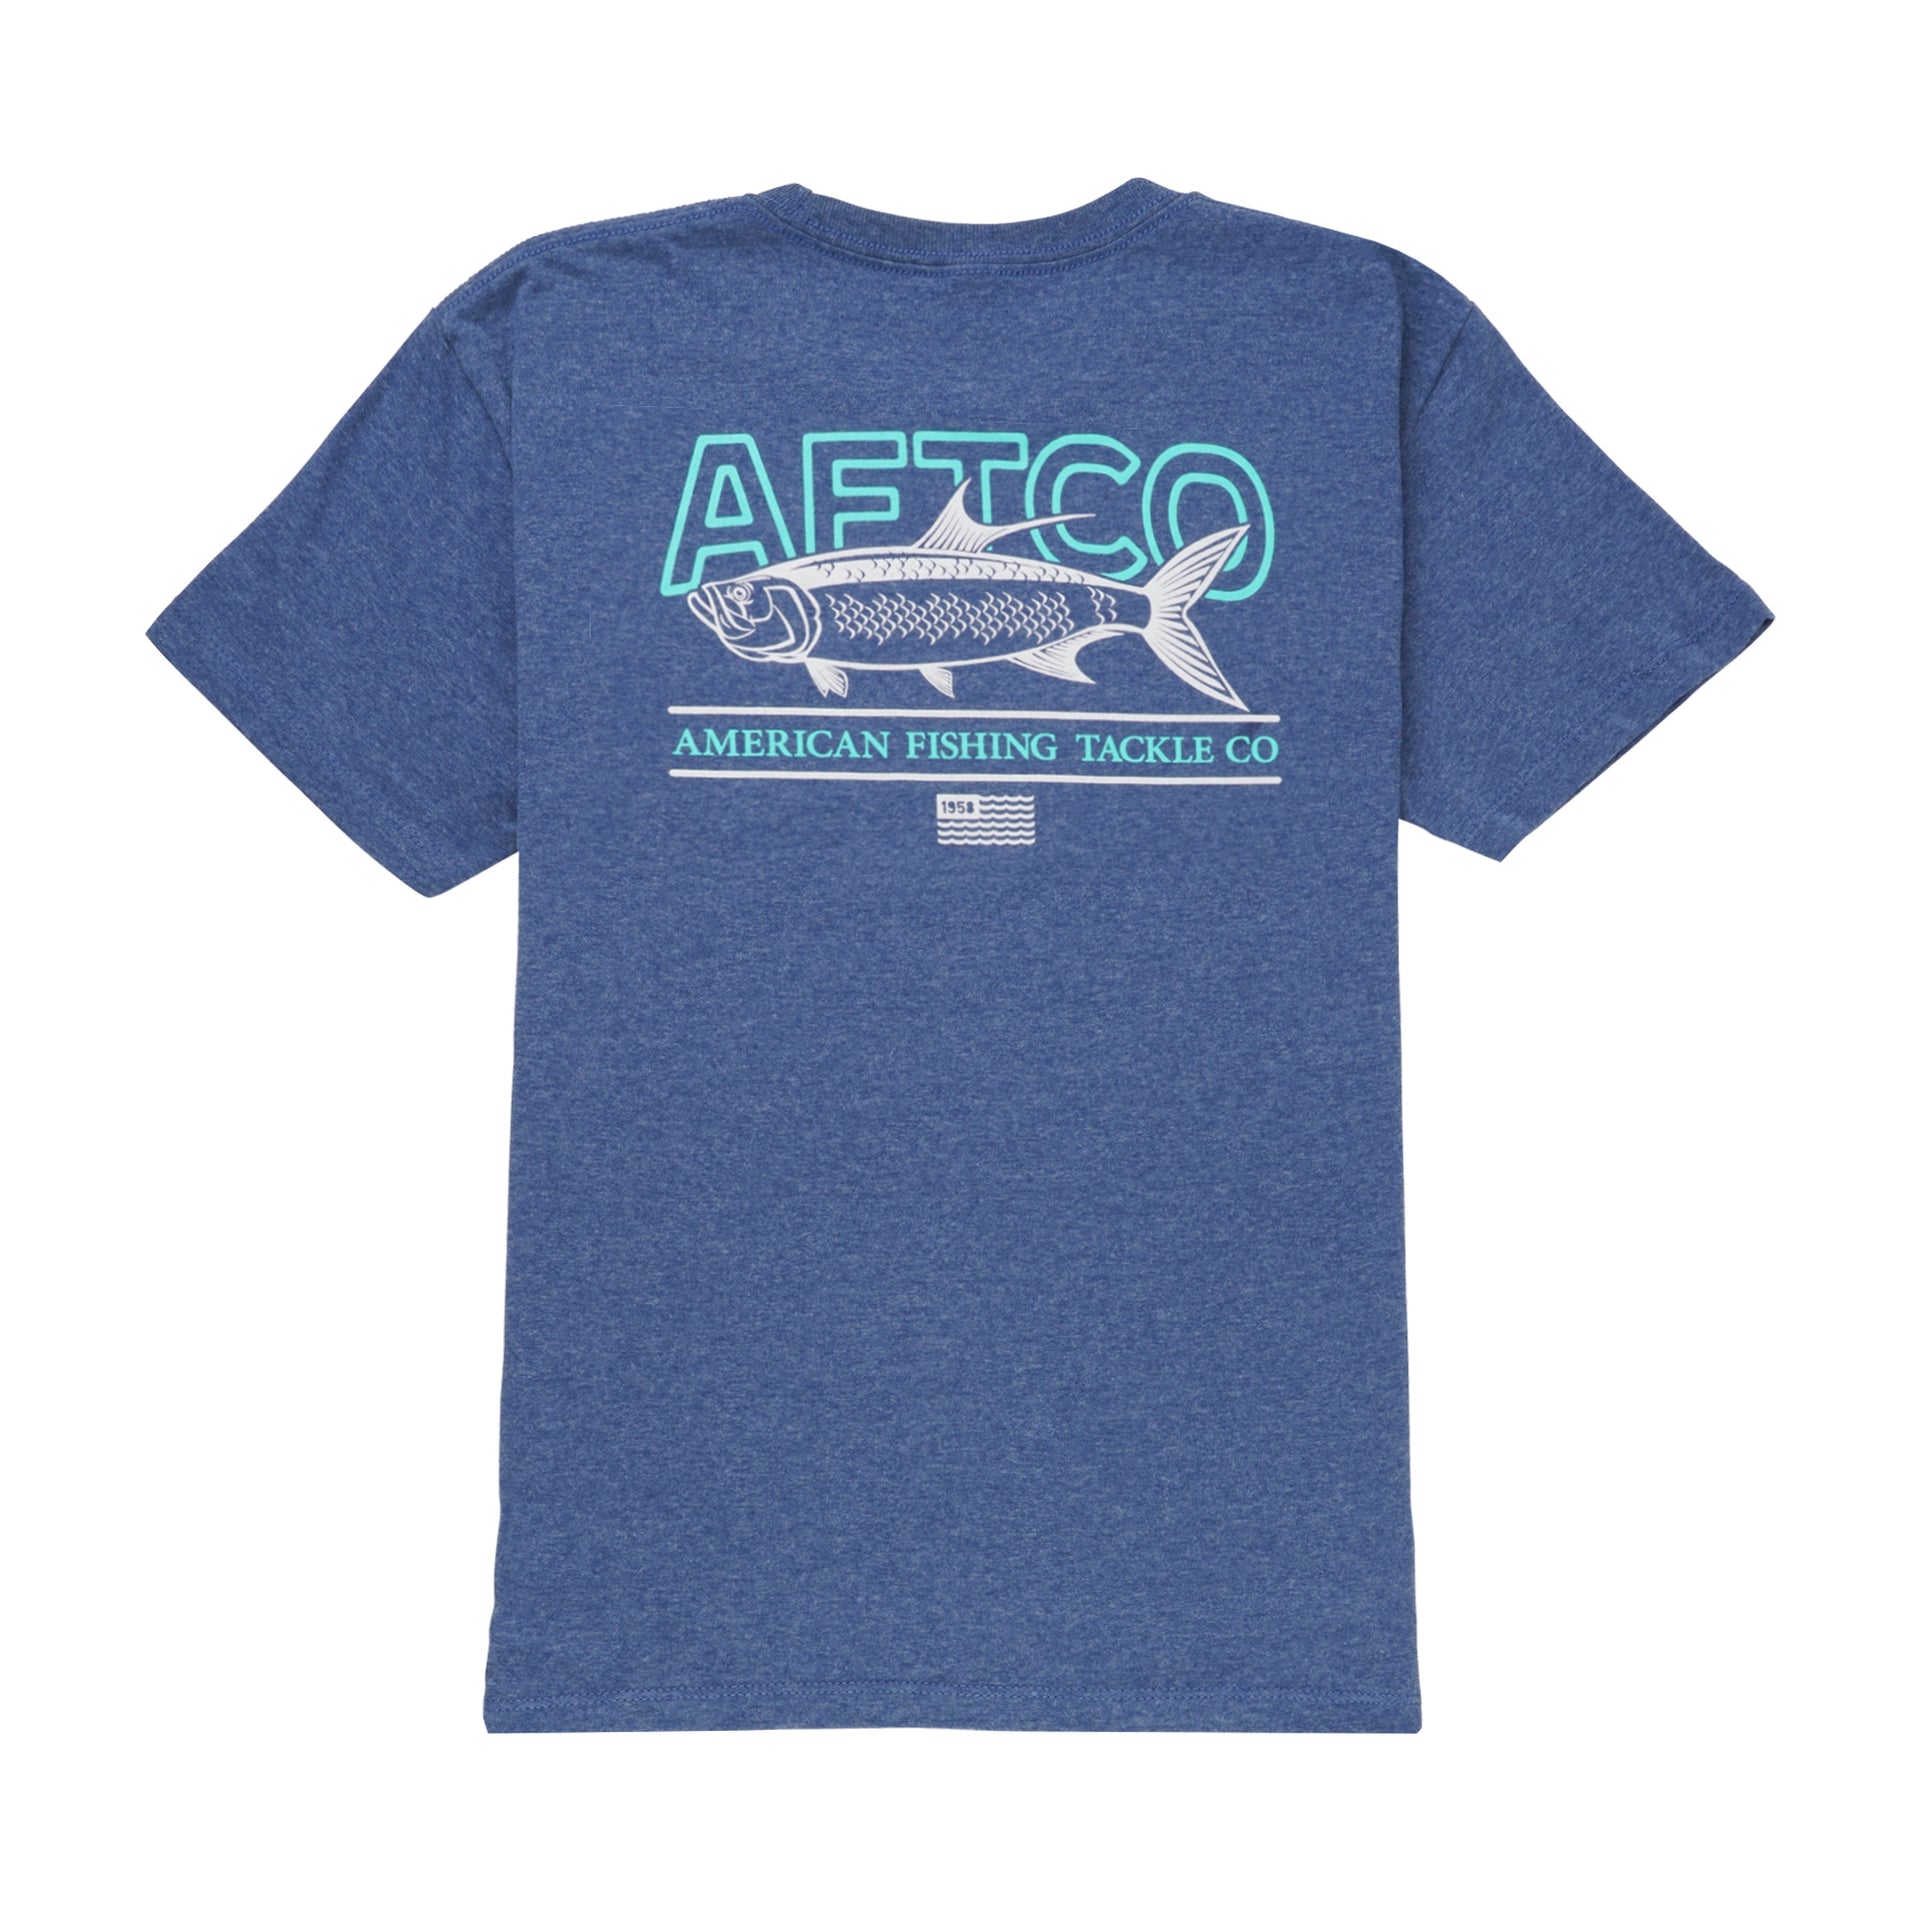 AFTCO American Fishing Tackle Co Men's T Shirt Size L Blue Short